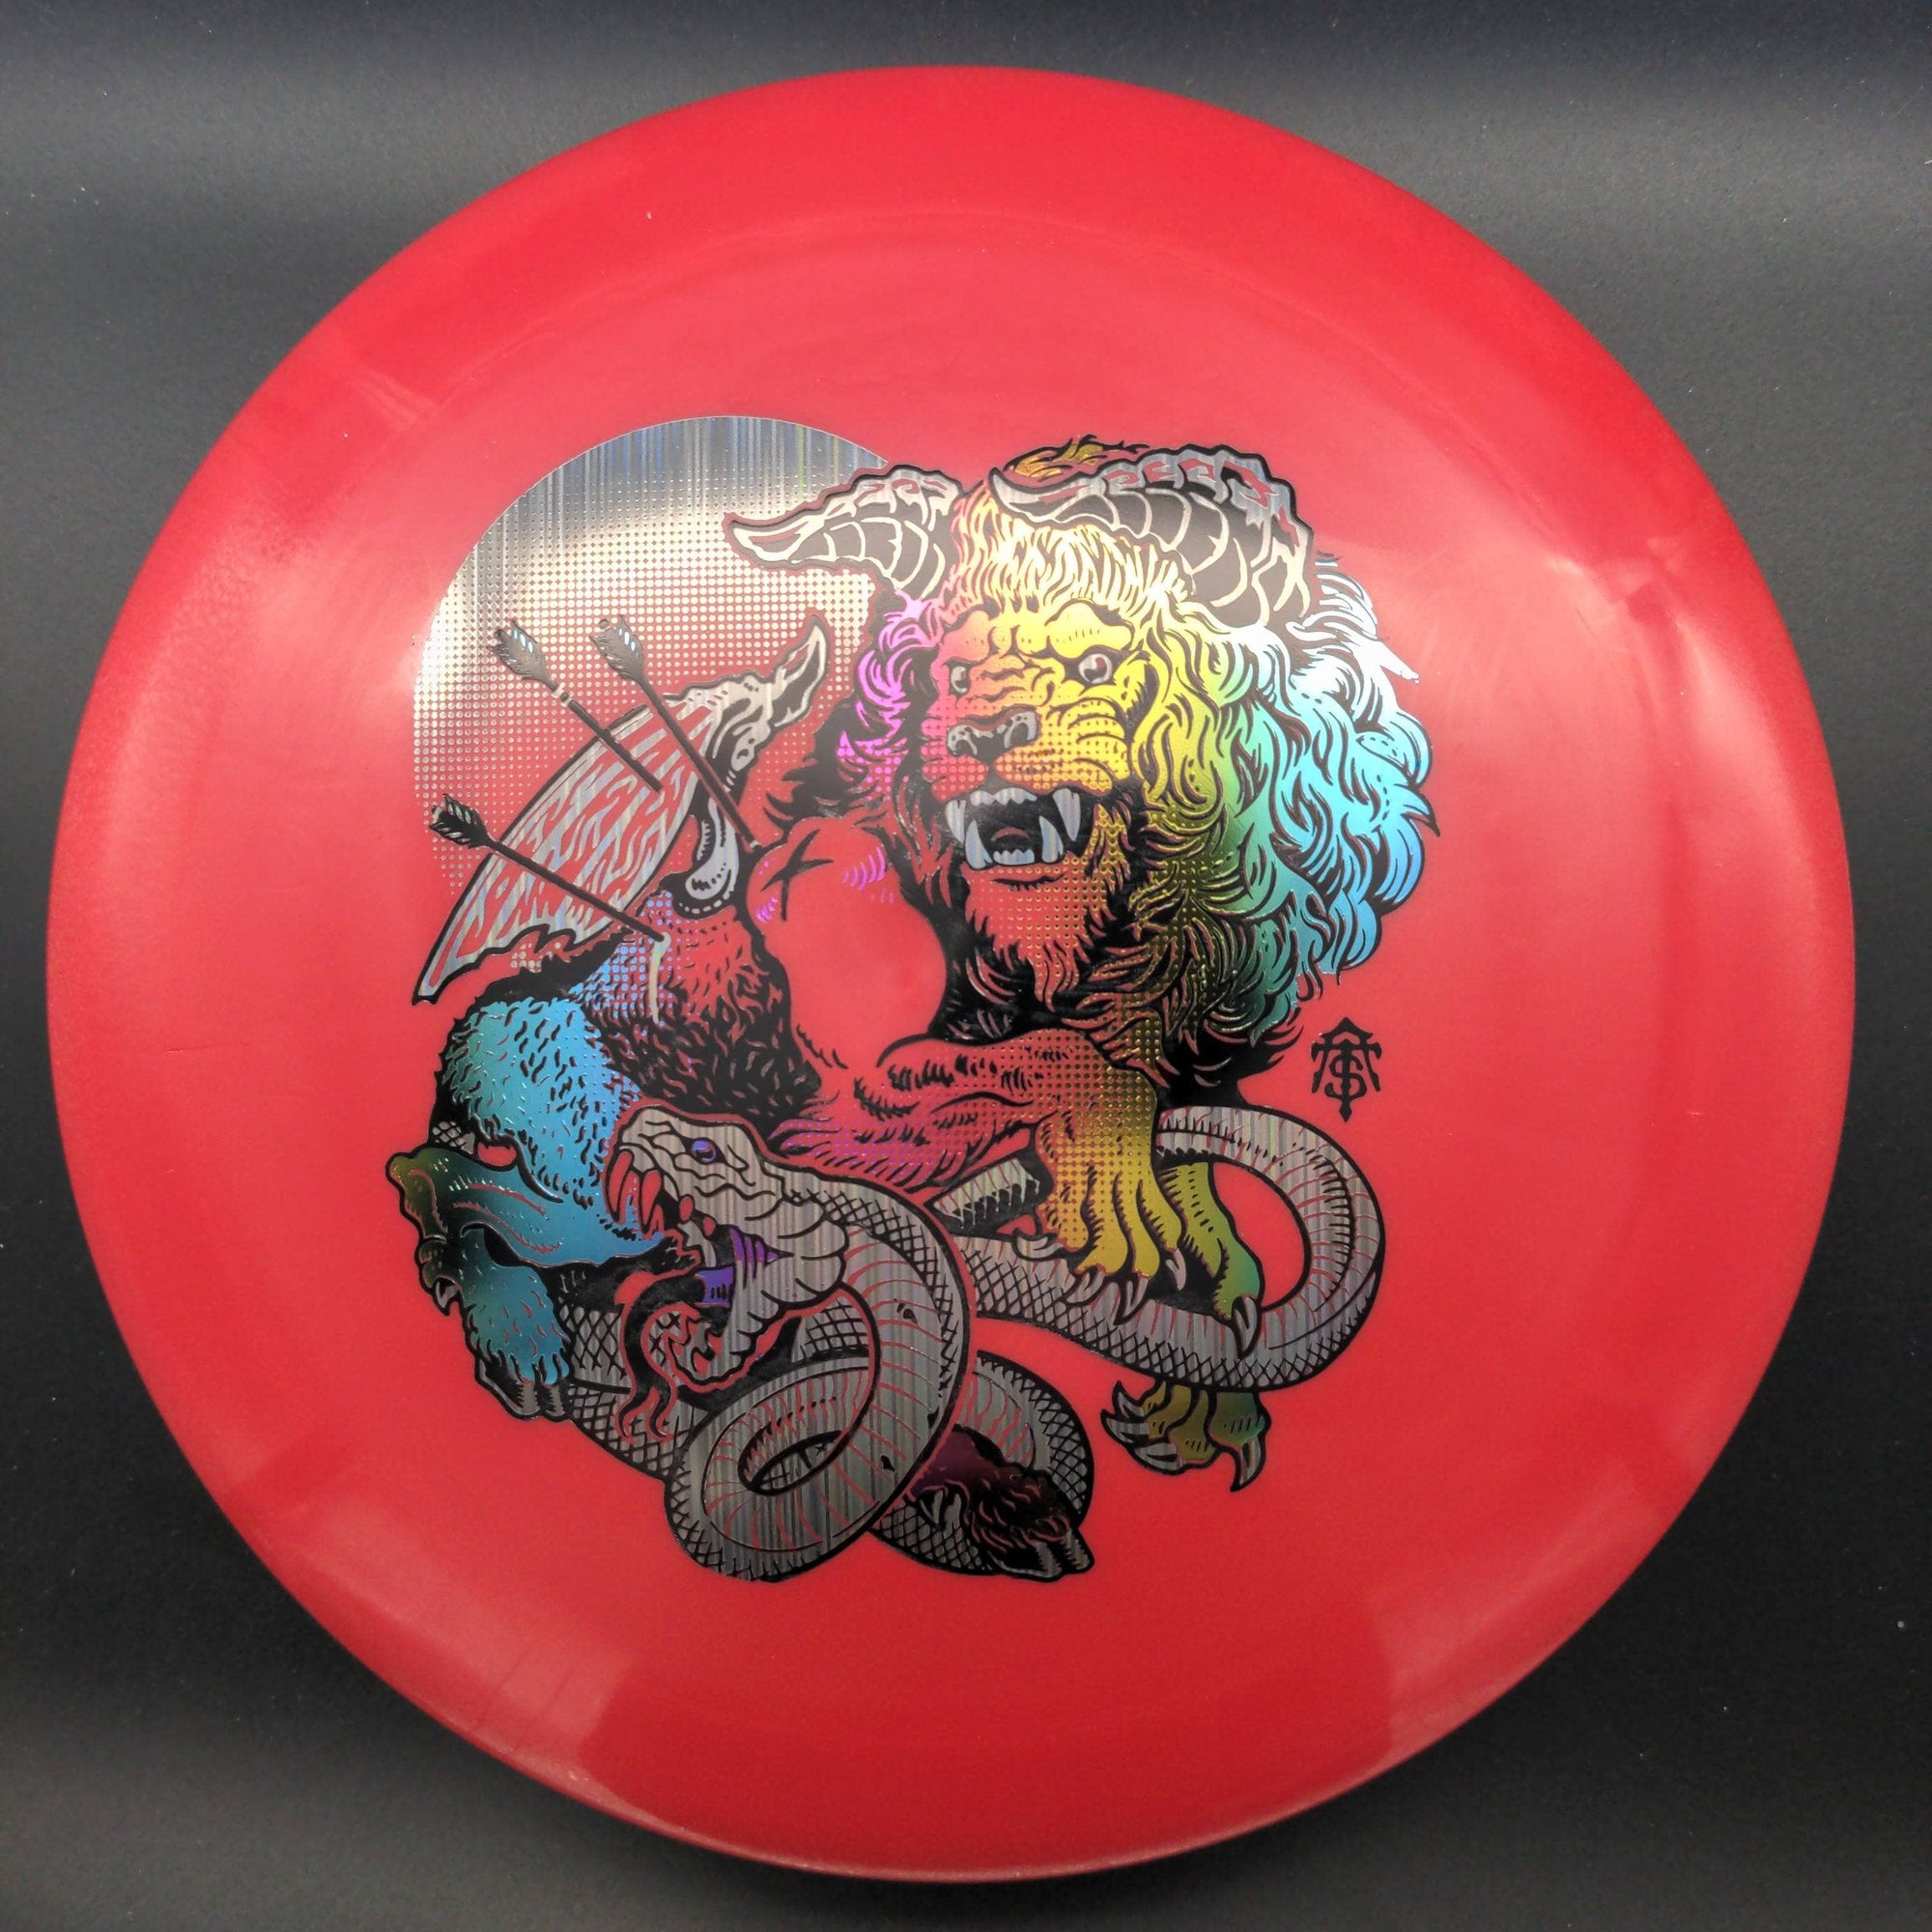 Infinite Discs Distance Driver Red Rainbow/Silver Grey Stamp 175g Emperor, G-Line, Thought Space Stamp